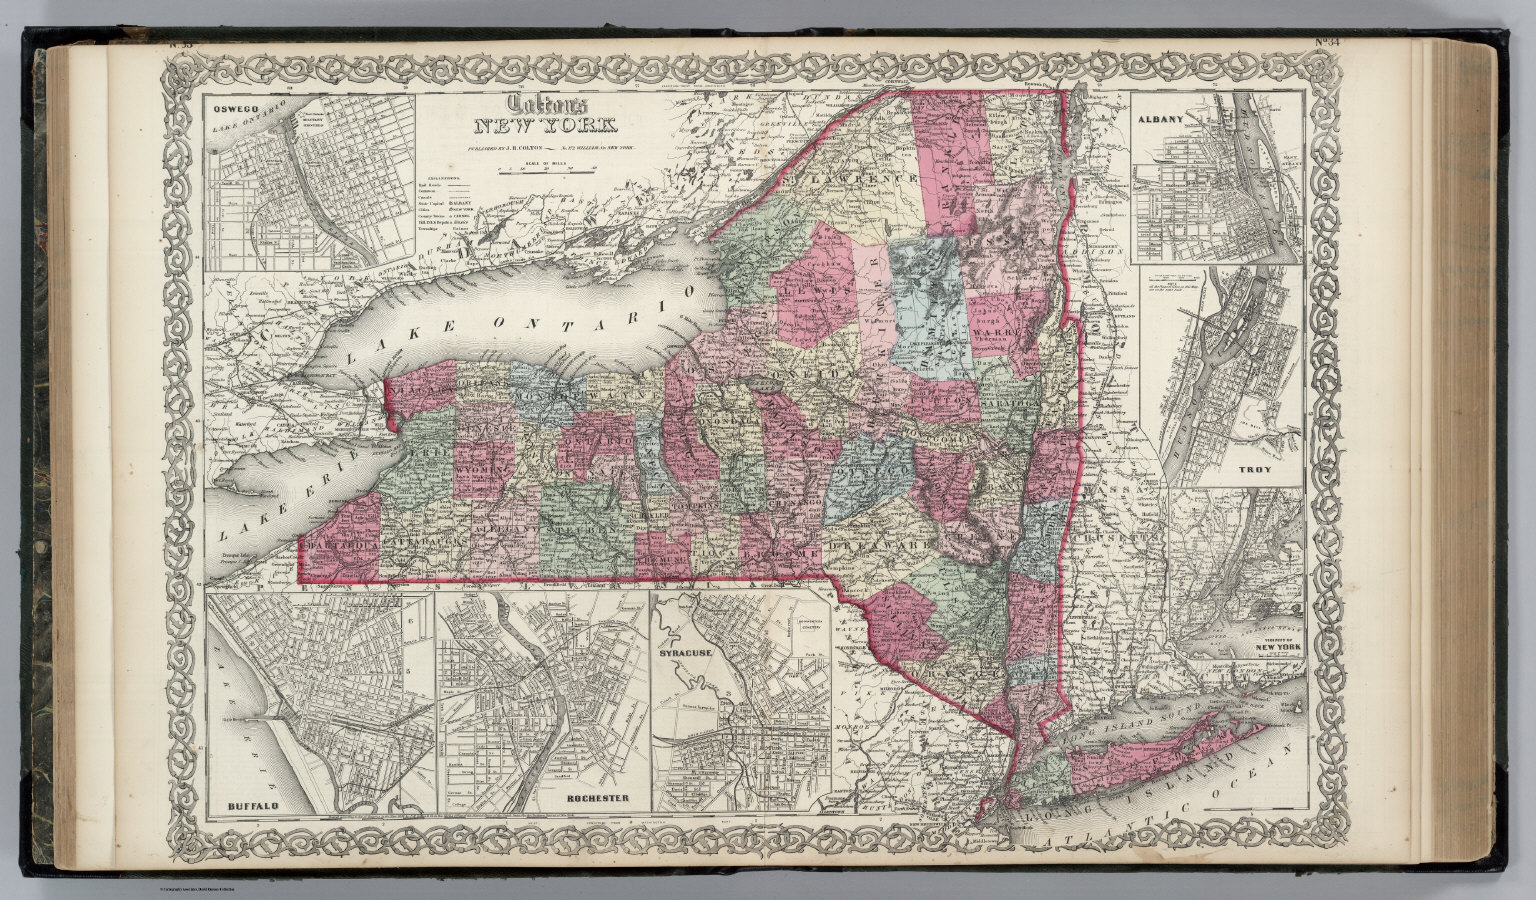 New York David Rumsey Historical Map Collection 